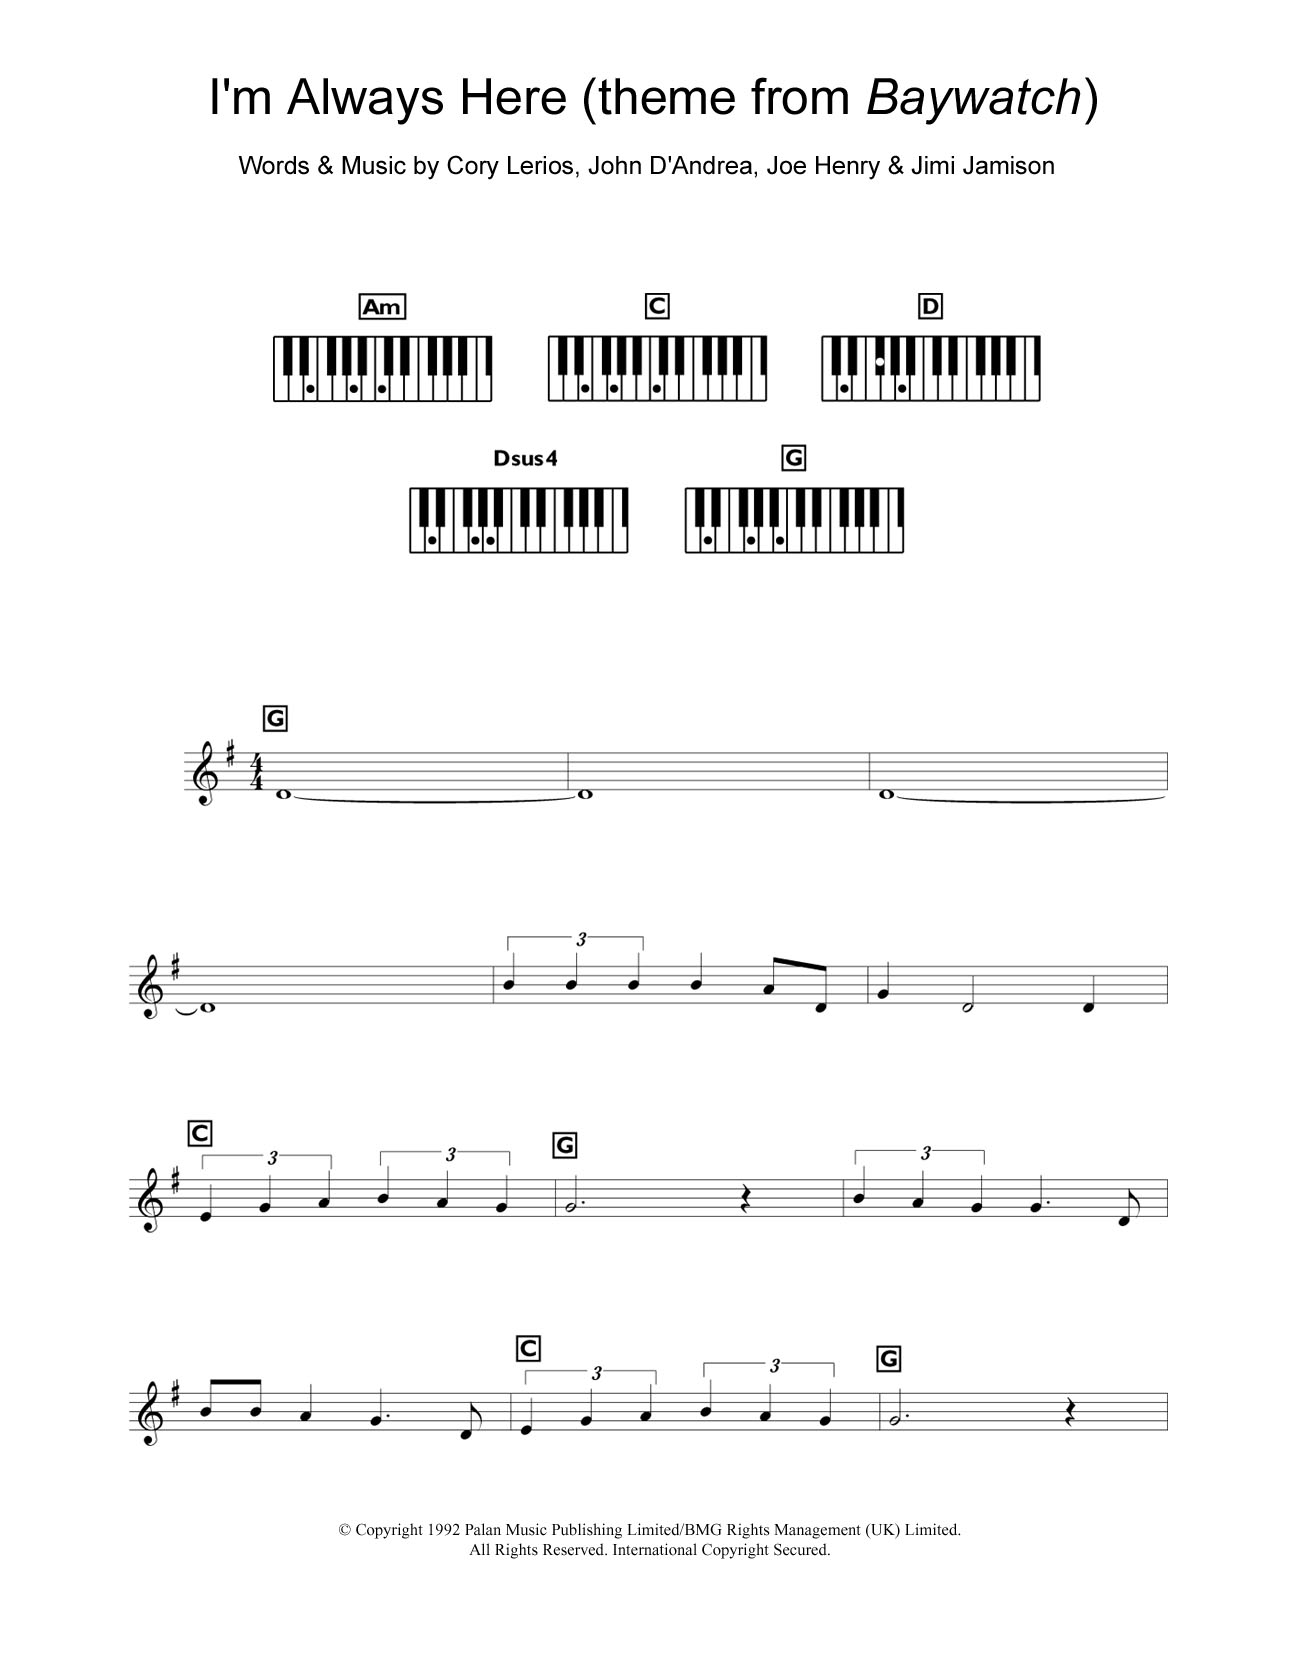 Download Jimi Jamison I'm Always Here (theme from Baywatch) Sheet Music